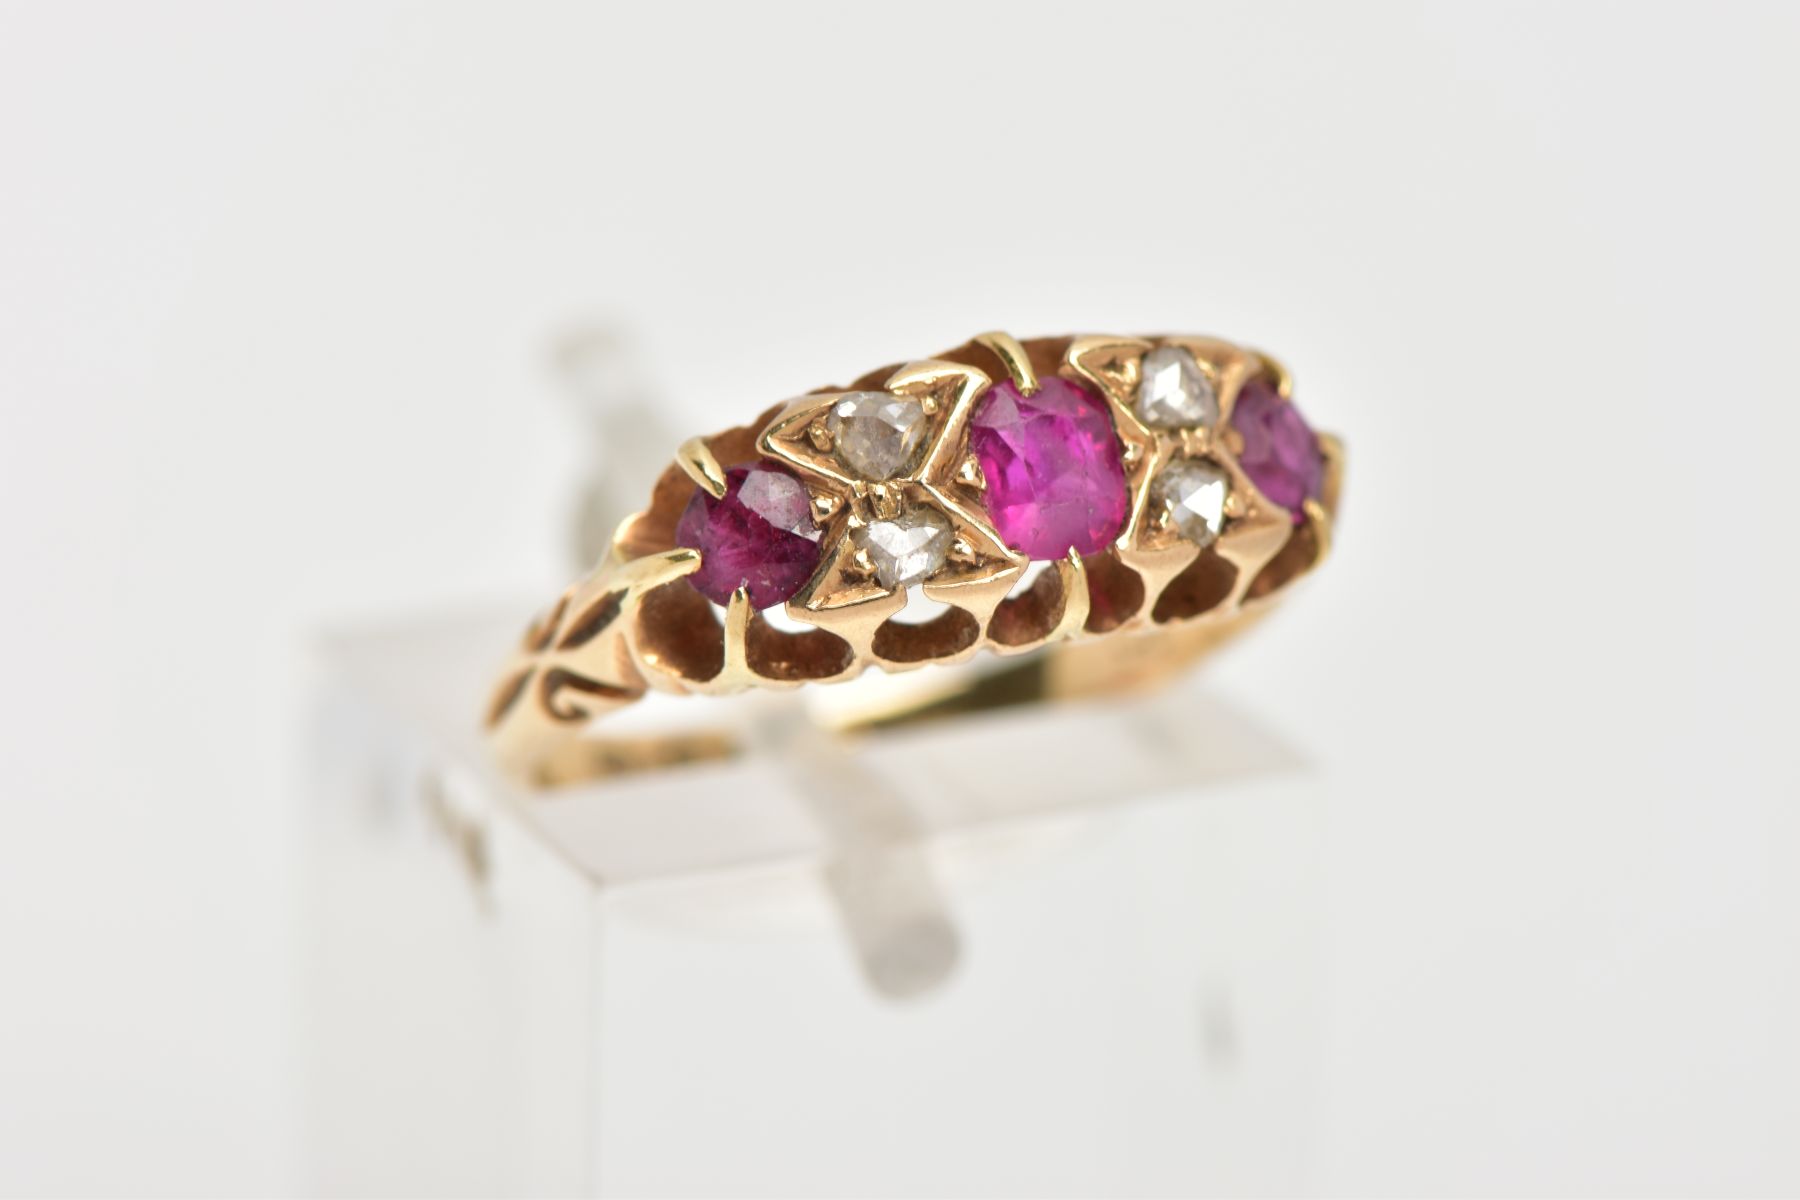 AN EARLY 20TH CENTURY RUBY AND DIAMOND RING, 18ct gold ring set with one cushion cut ruby and two - Image 4 of 4